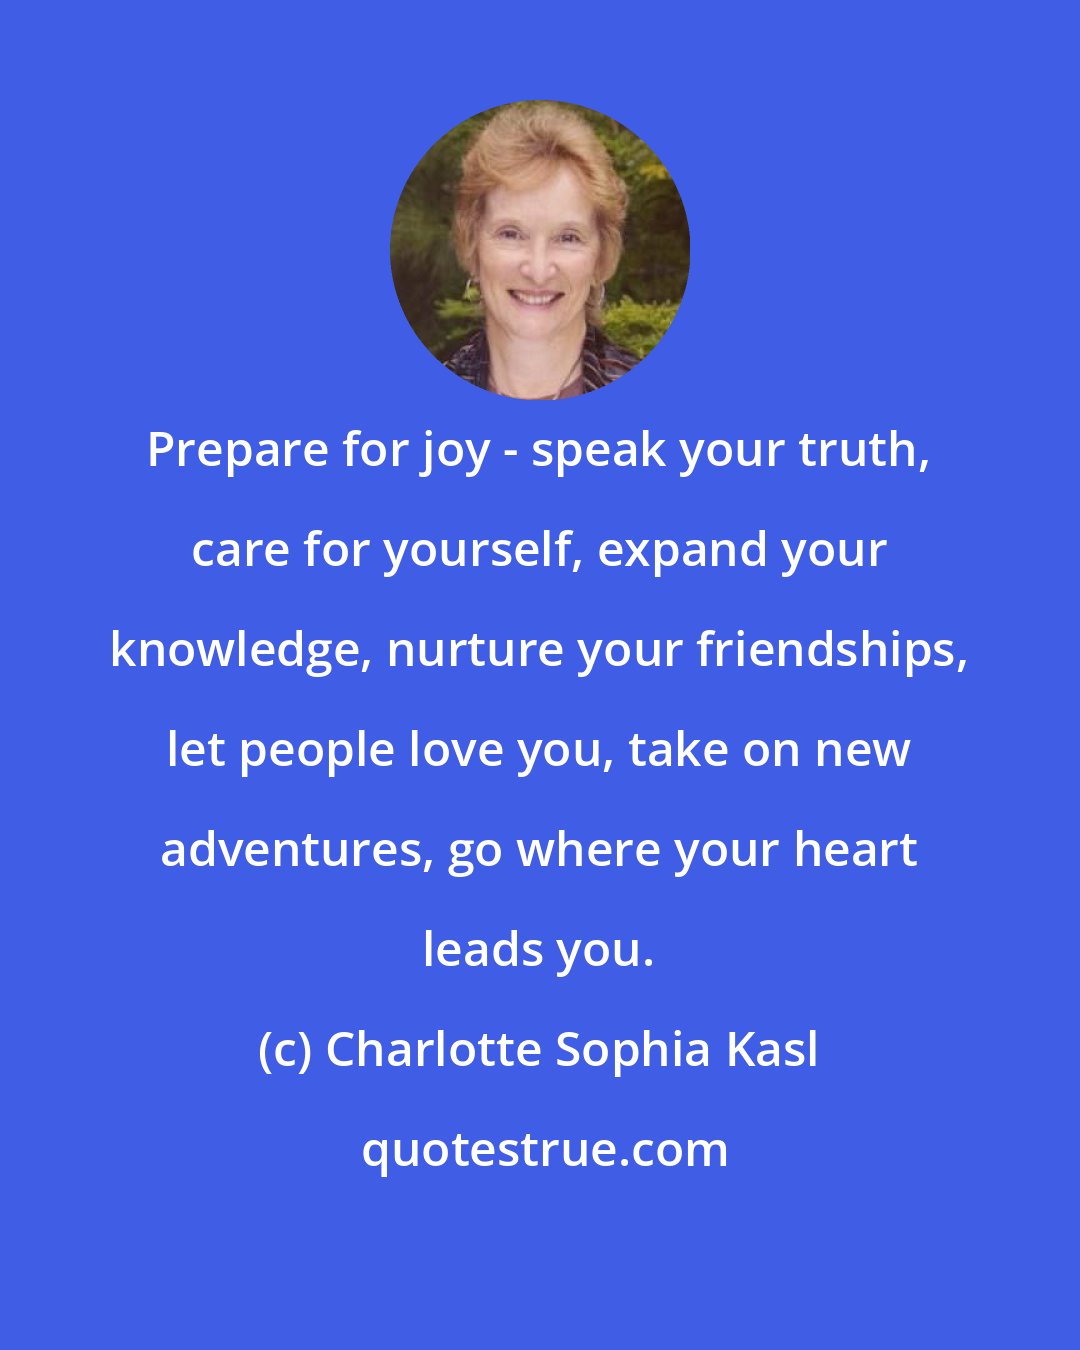 Charlotte Sophia Kasl: Prepare for joy - speak your truth, care for yourself, expand your knowledge, nurture your friendships, let people love you, take on new adventures, go where your heart leads you.